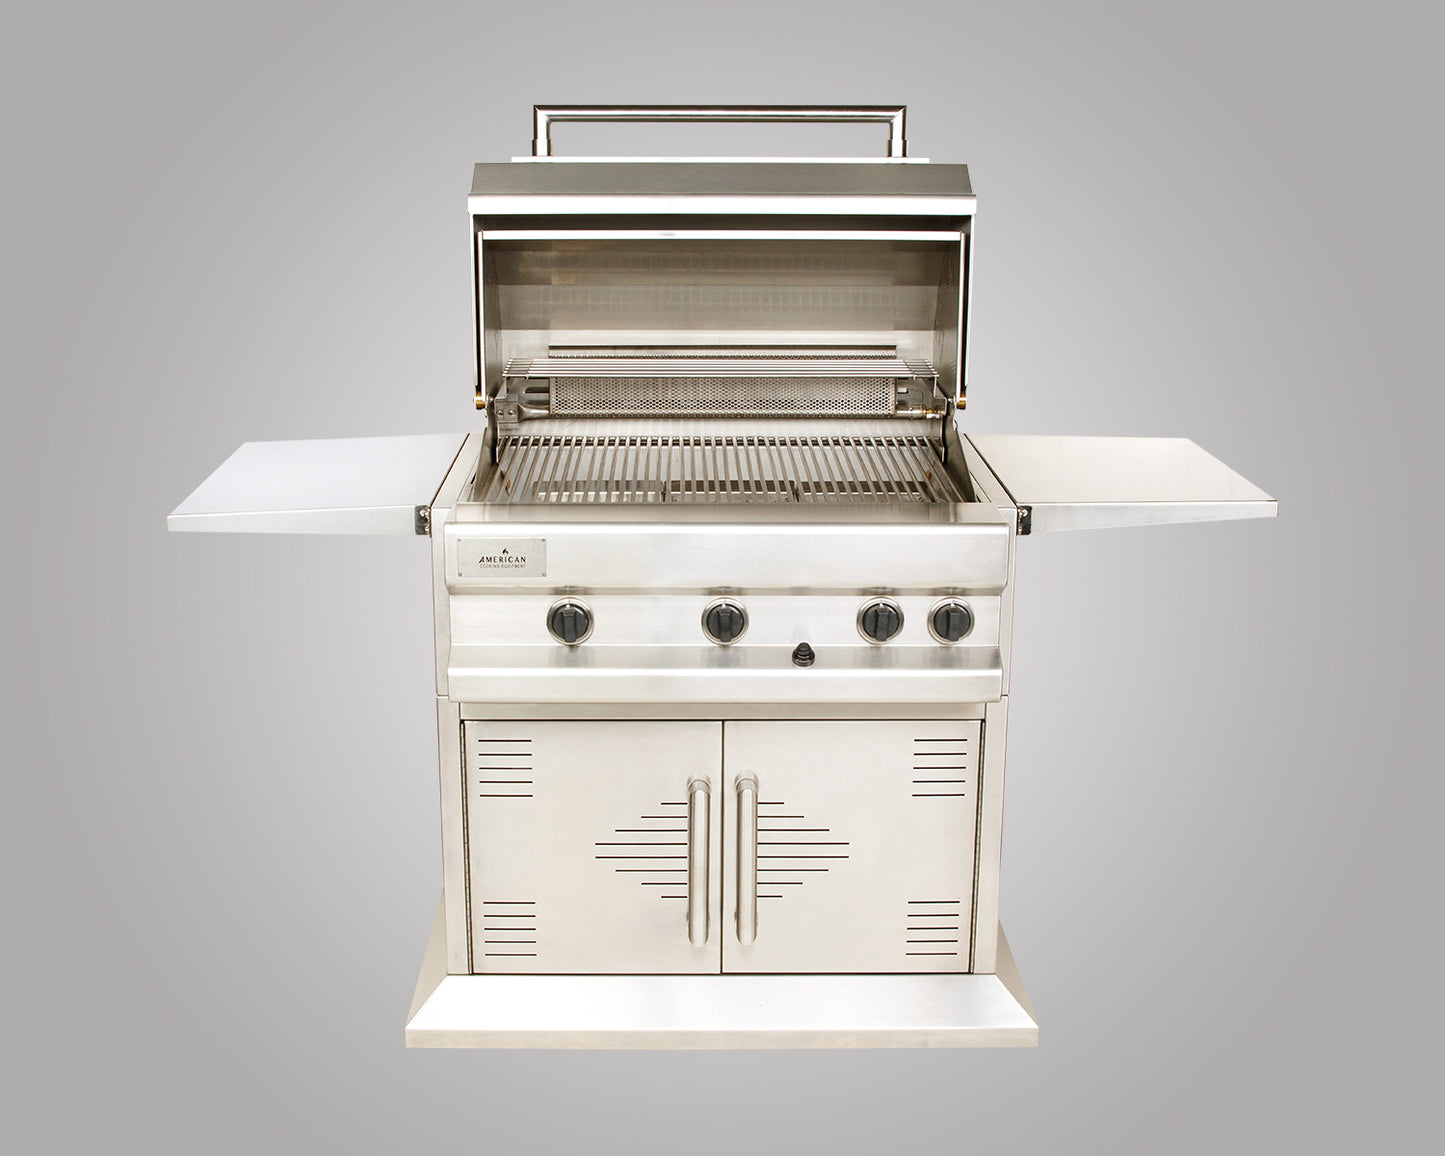 'THREE ONE SIX' 316L - 6 Burner Stand-Alone Grill with Rotisserie